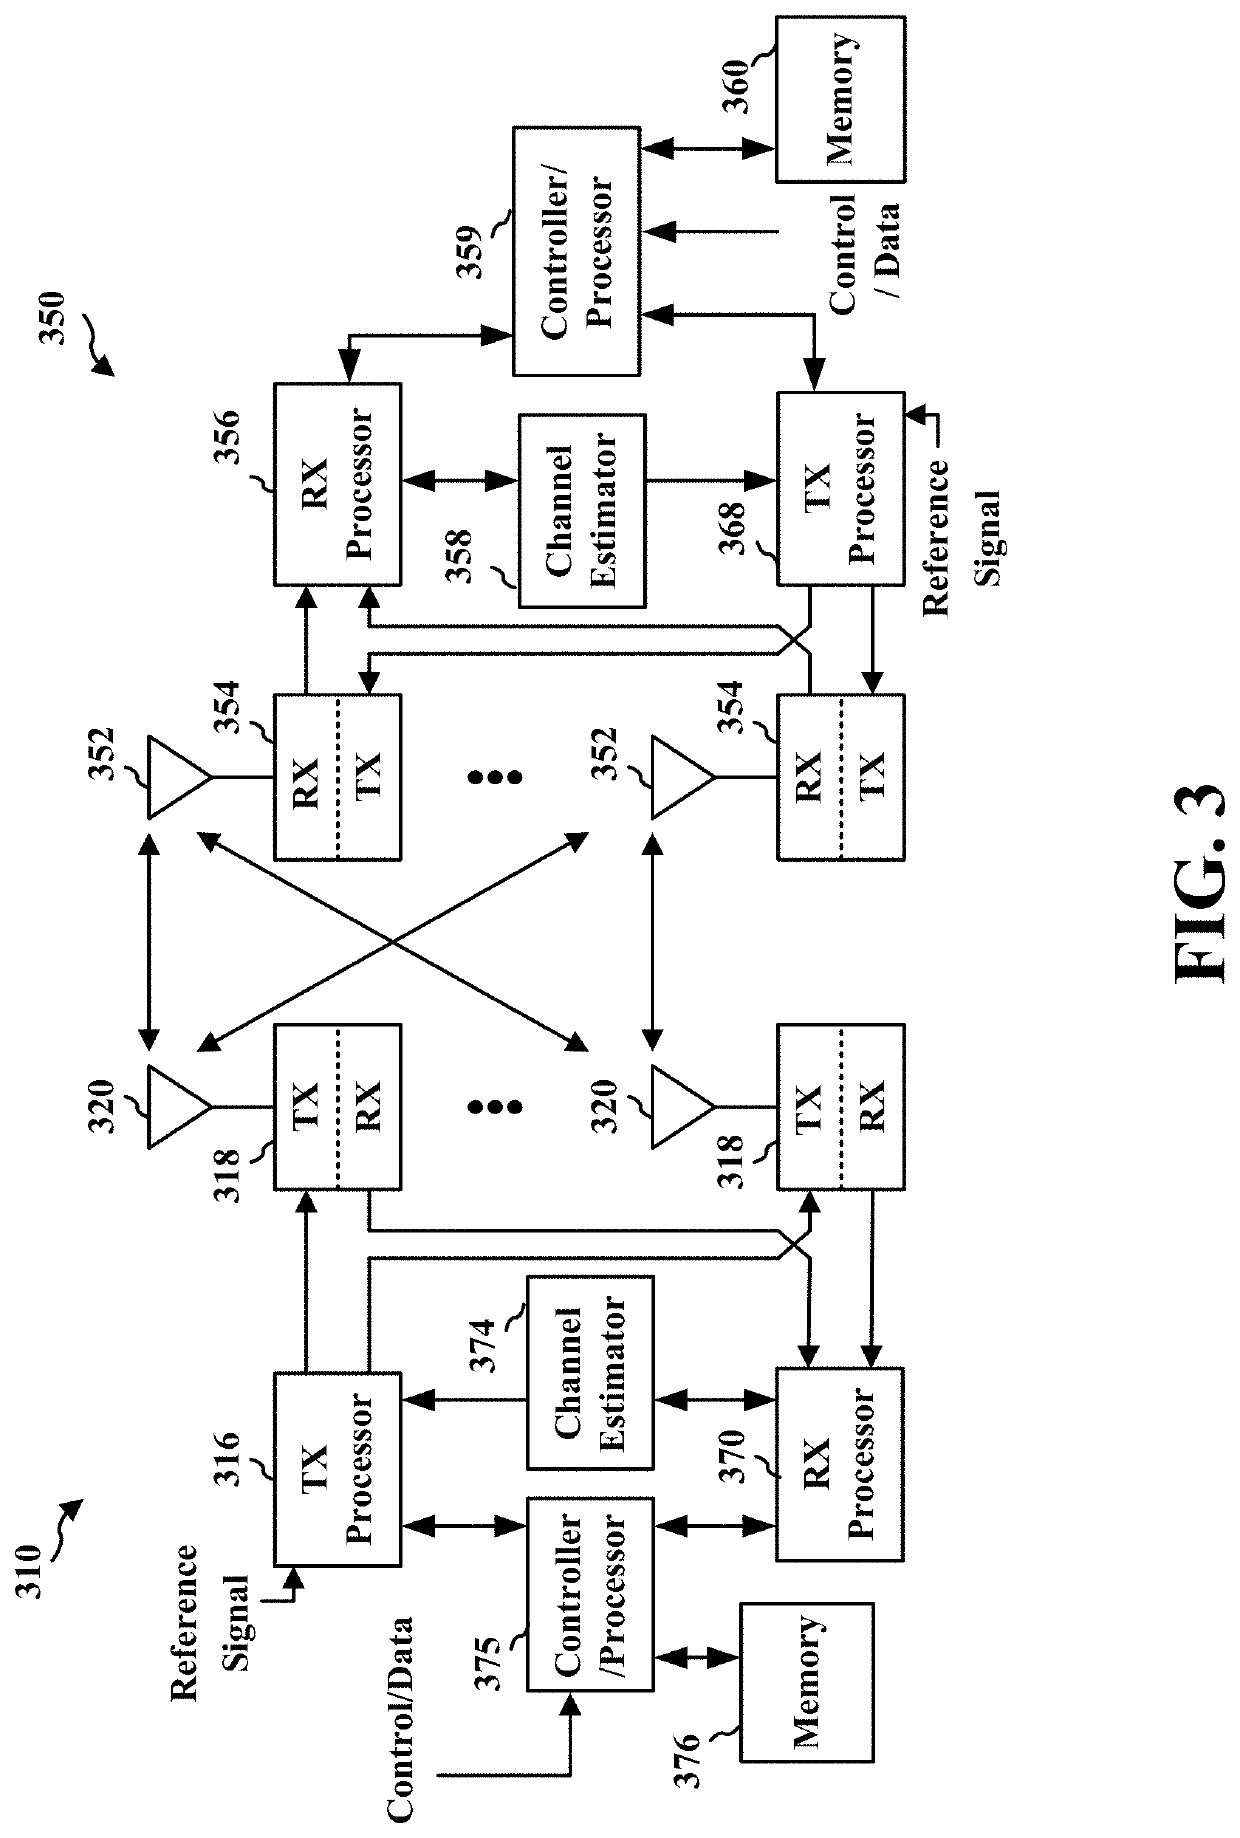 Interleaver design for noncoherent reed muller codes